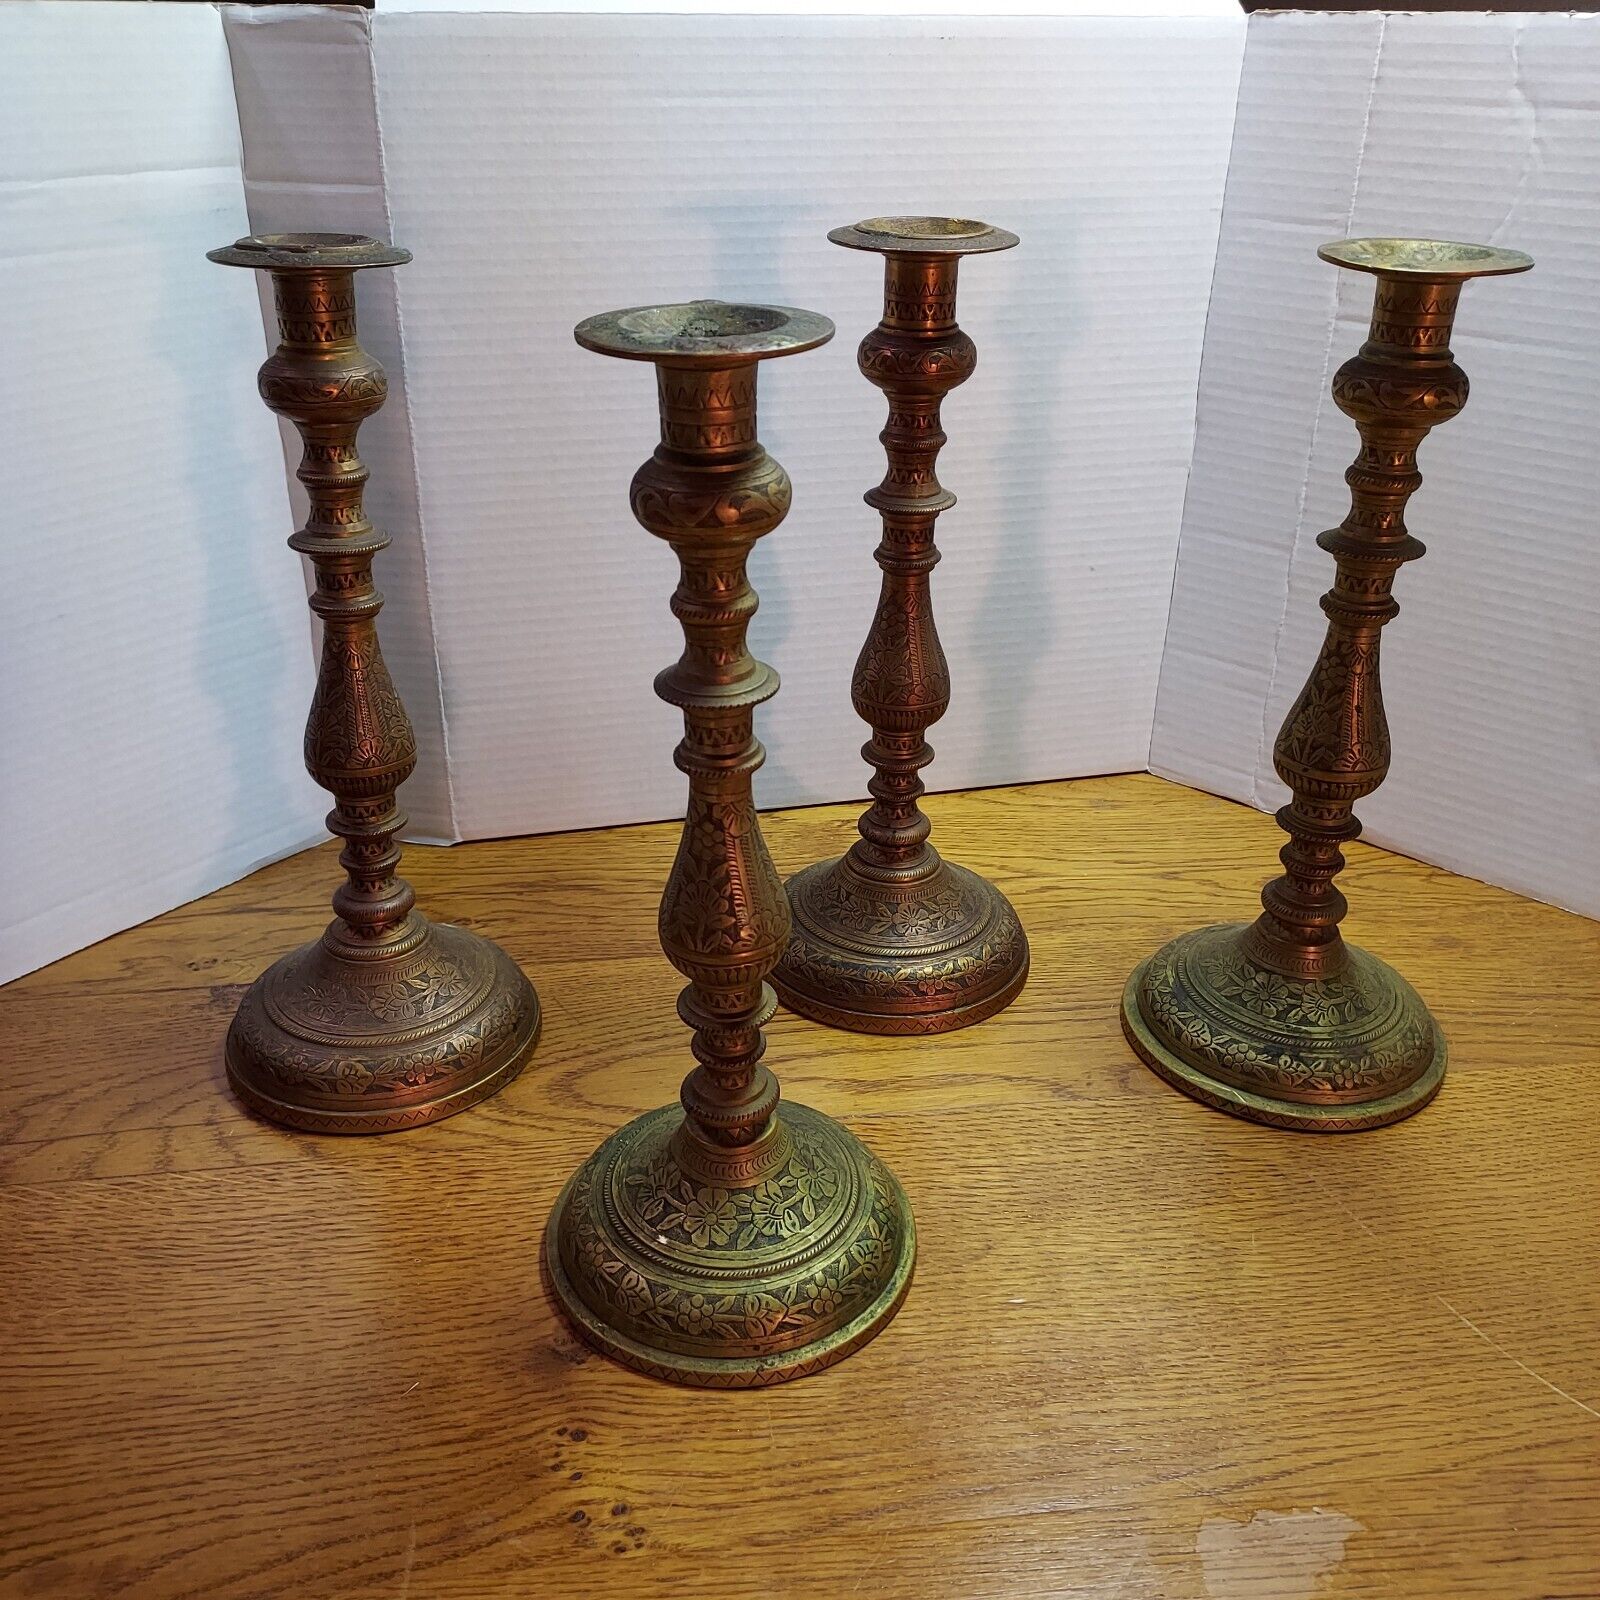 4 Vintage Bronze Candle Holders Used - Lovely Patina, 12 Inch Tall